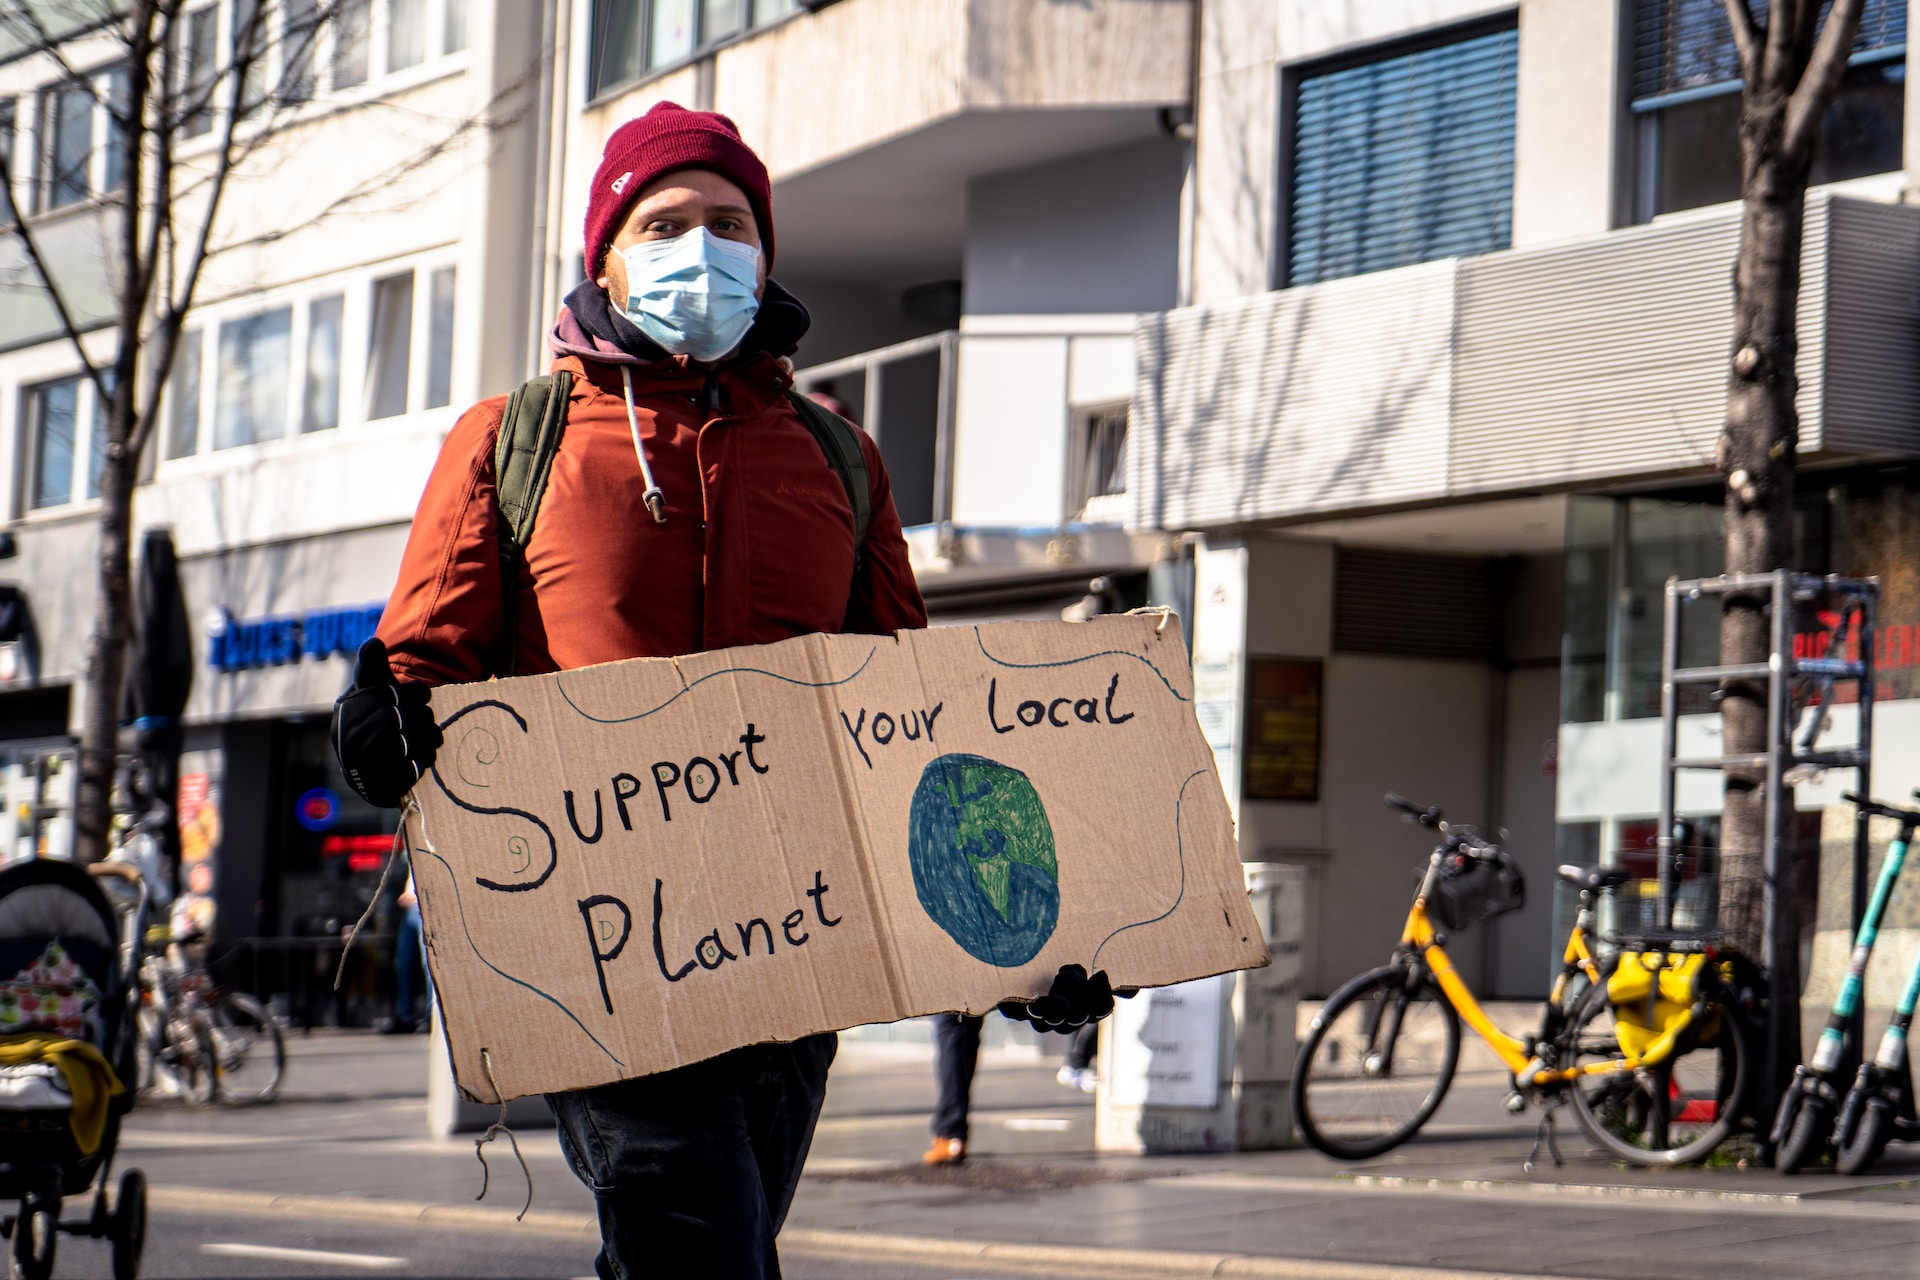 Man encouraging sustainable business practices with a sign stating Support your local planet.